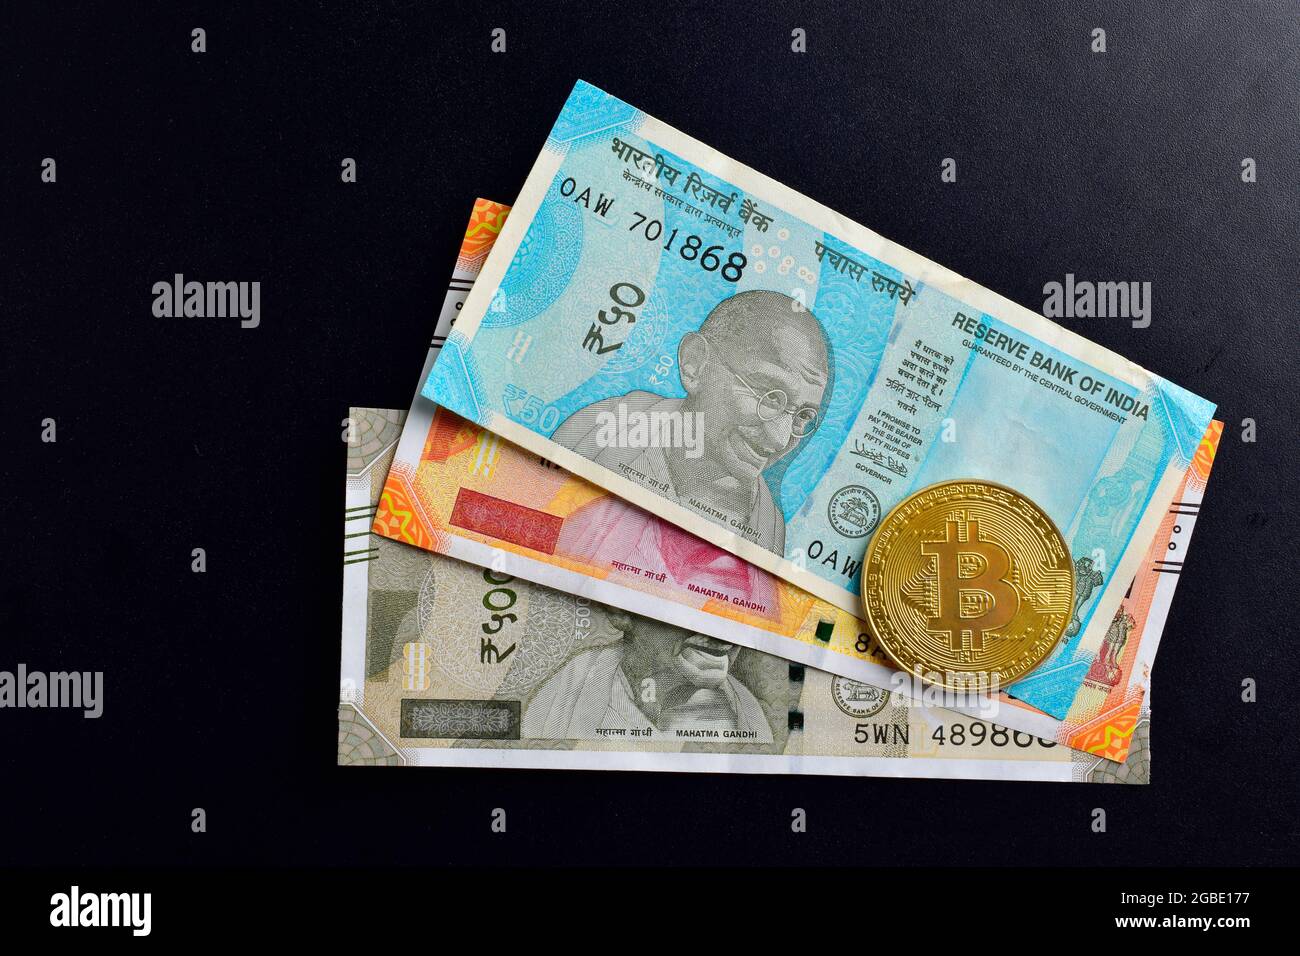 Top View Of Bitcoin With Indian Currency Stock Photo